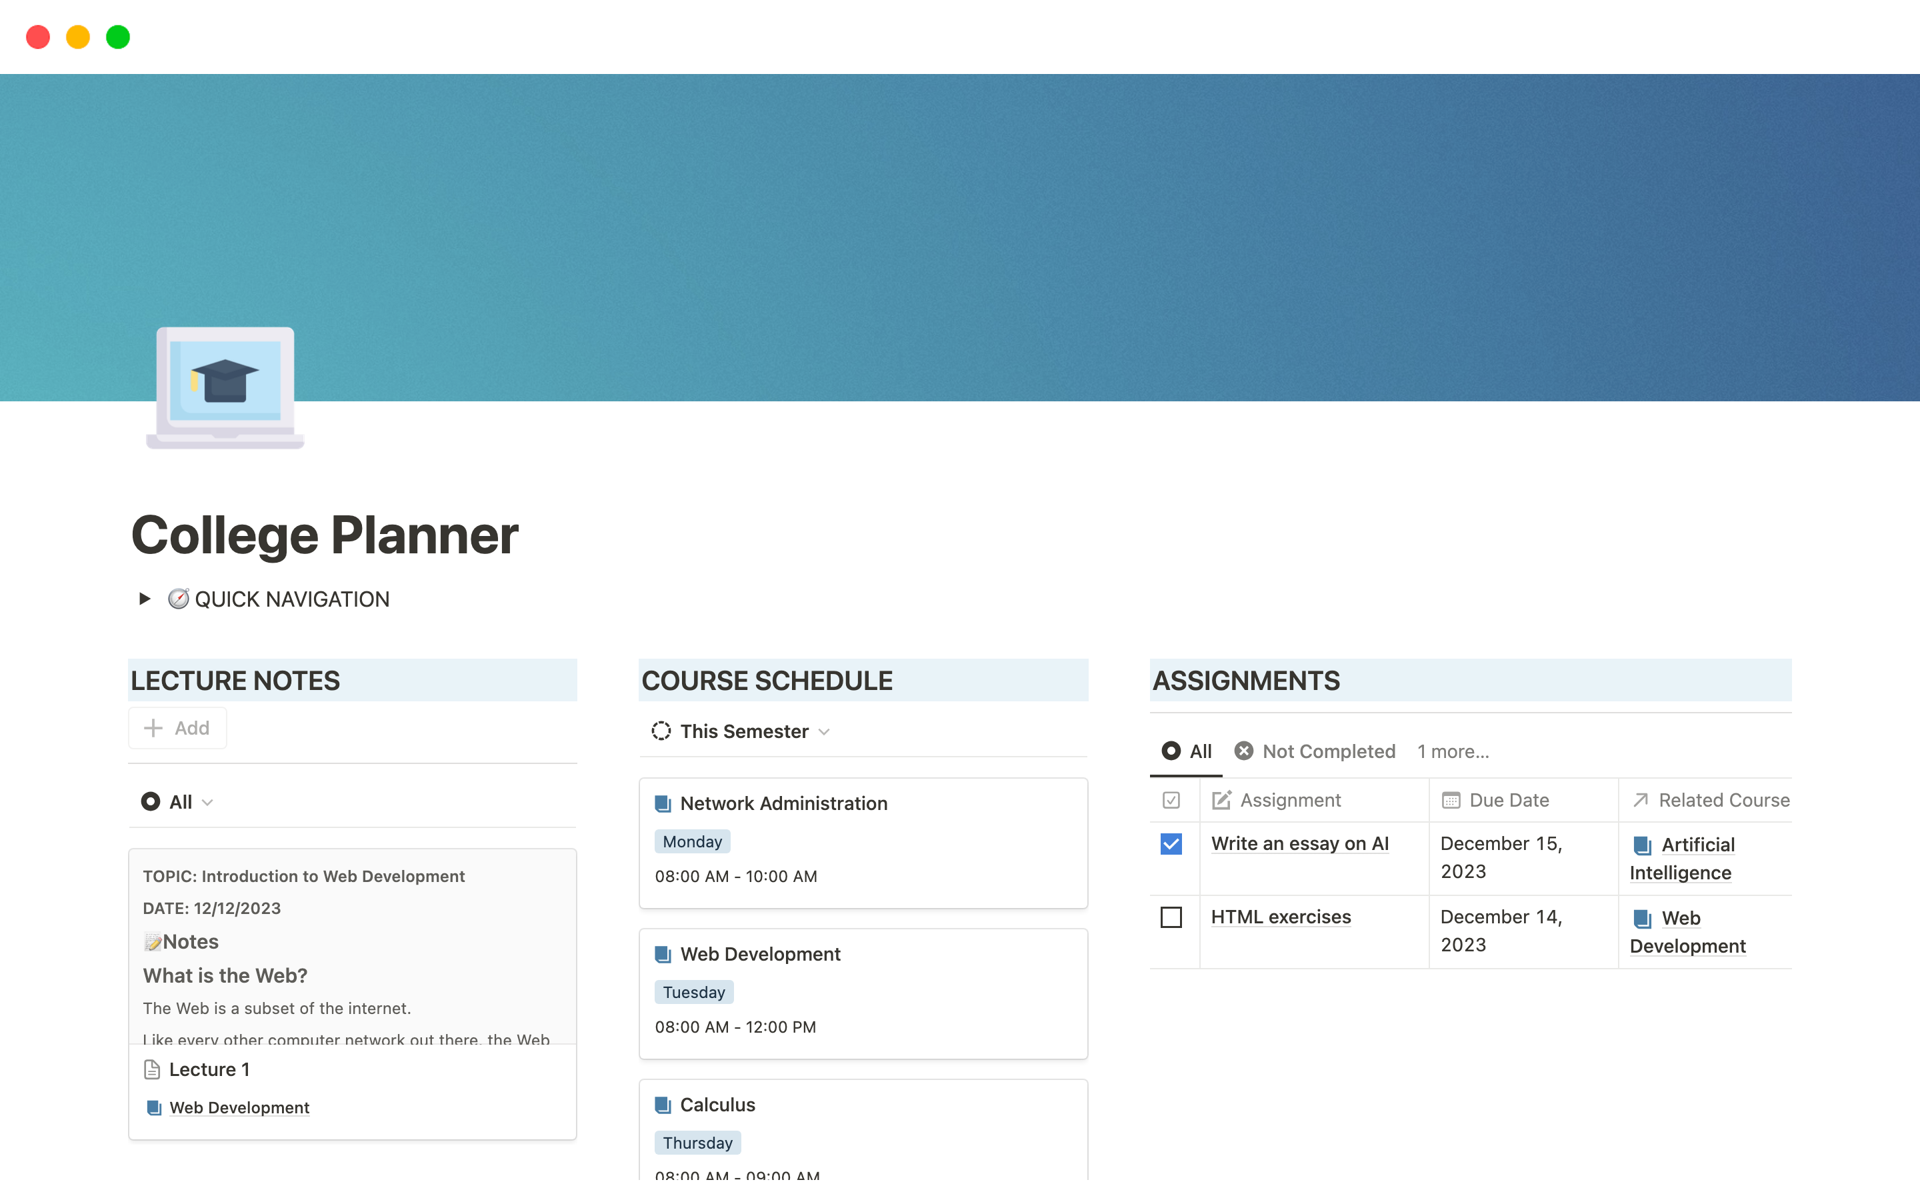 This College Planner Notion template helps you to keep track of your course schedule and assignments, organize lecture notes, and never miss important events, all in one place.